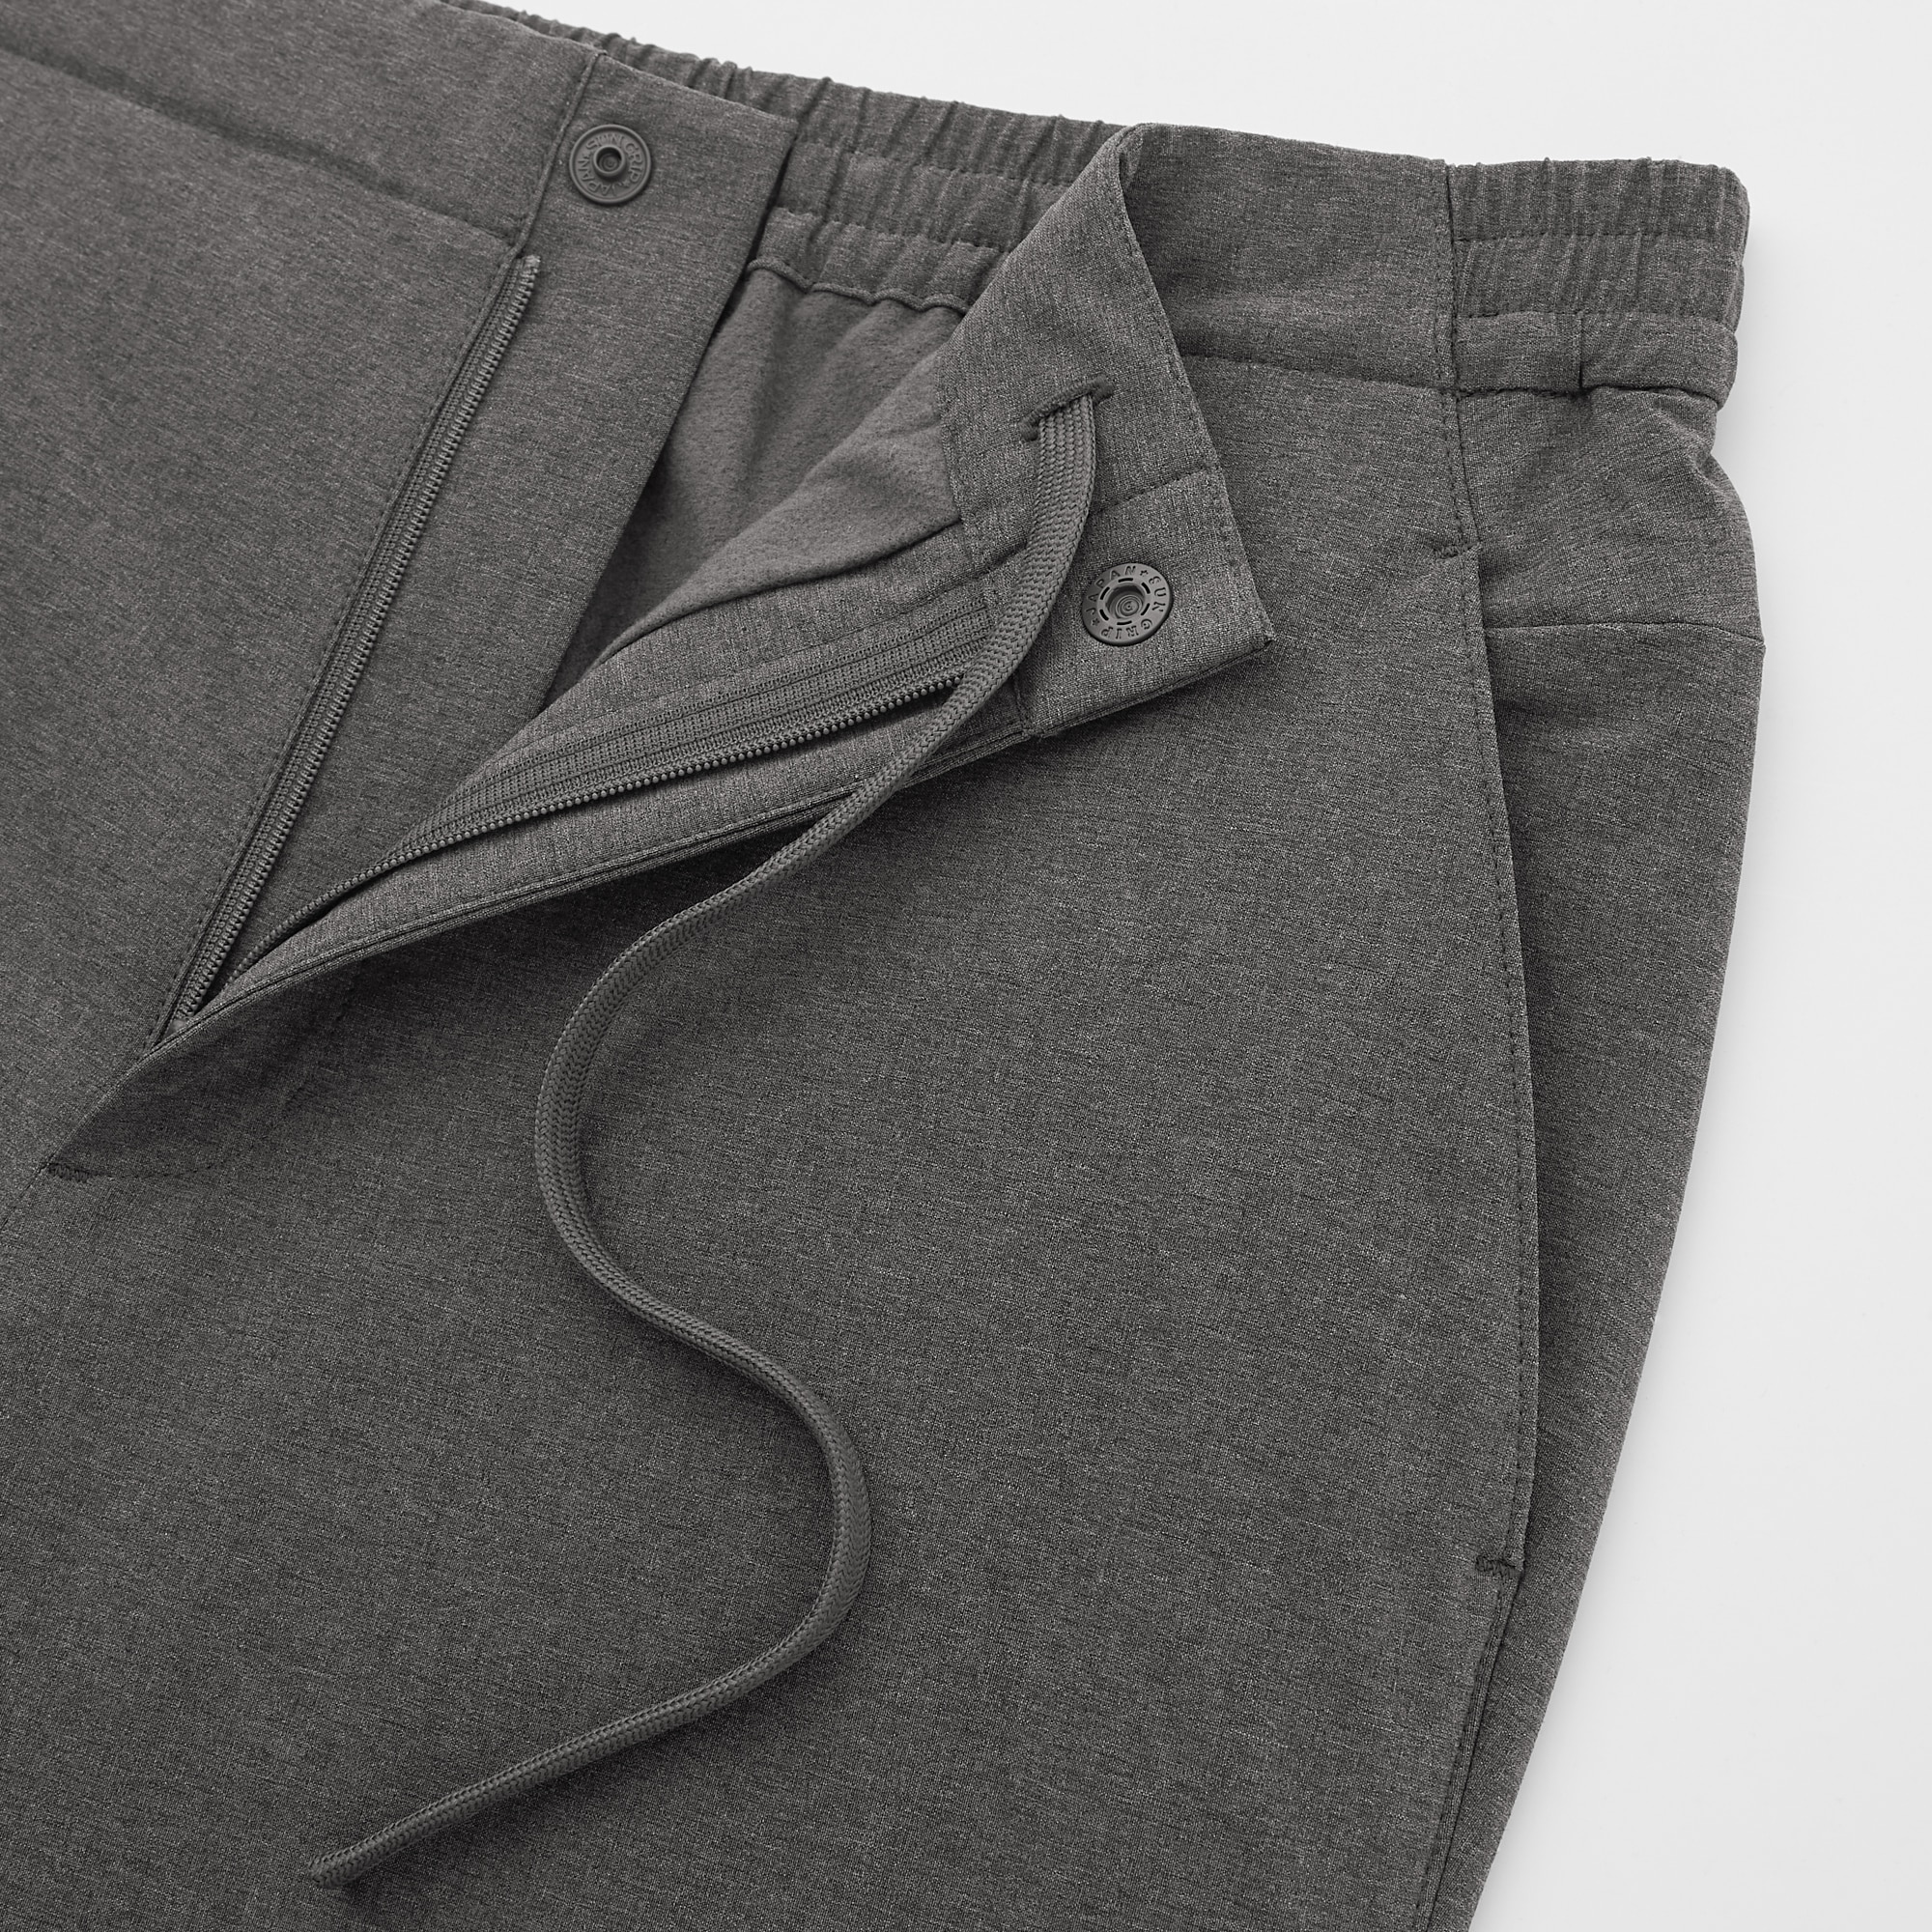 Uniqlo Heattech Tops  Pants You Need This Winter